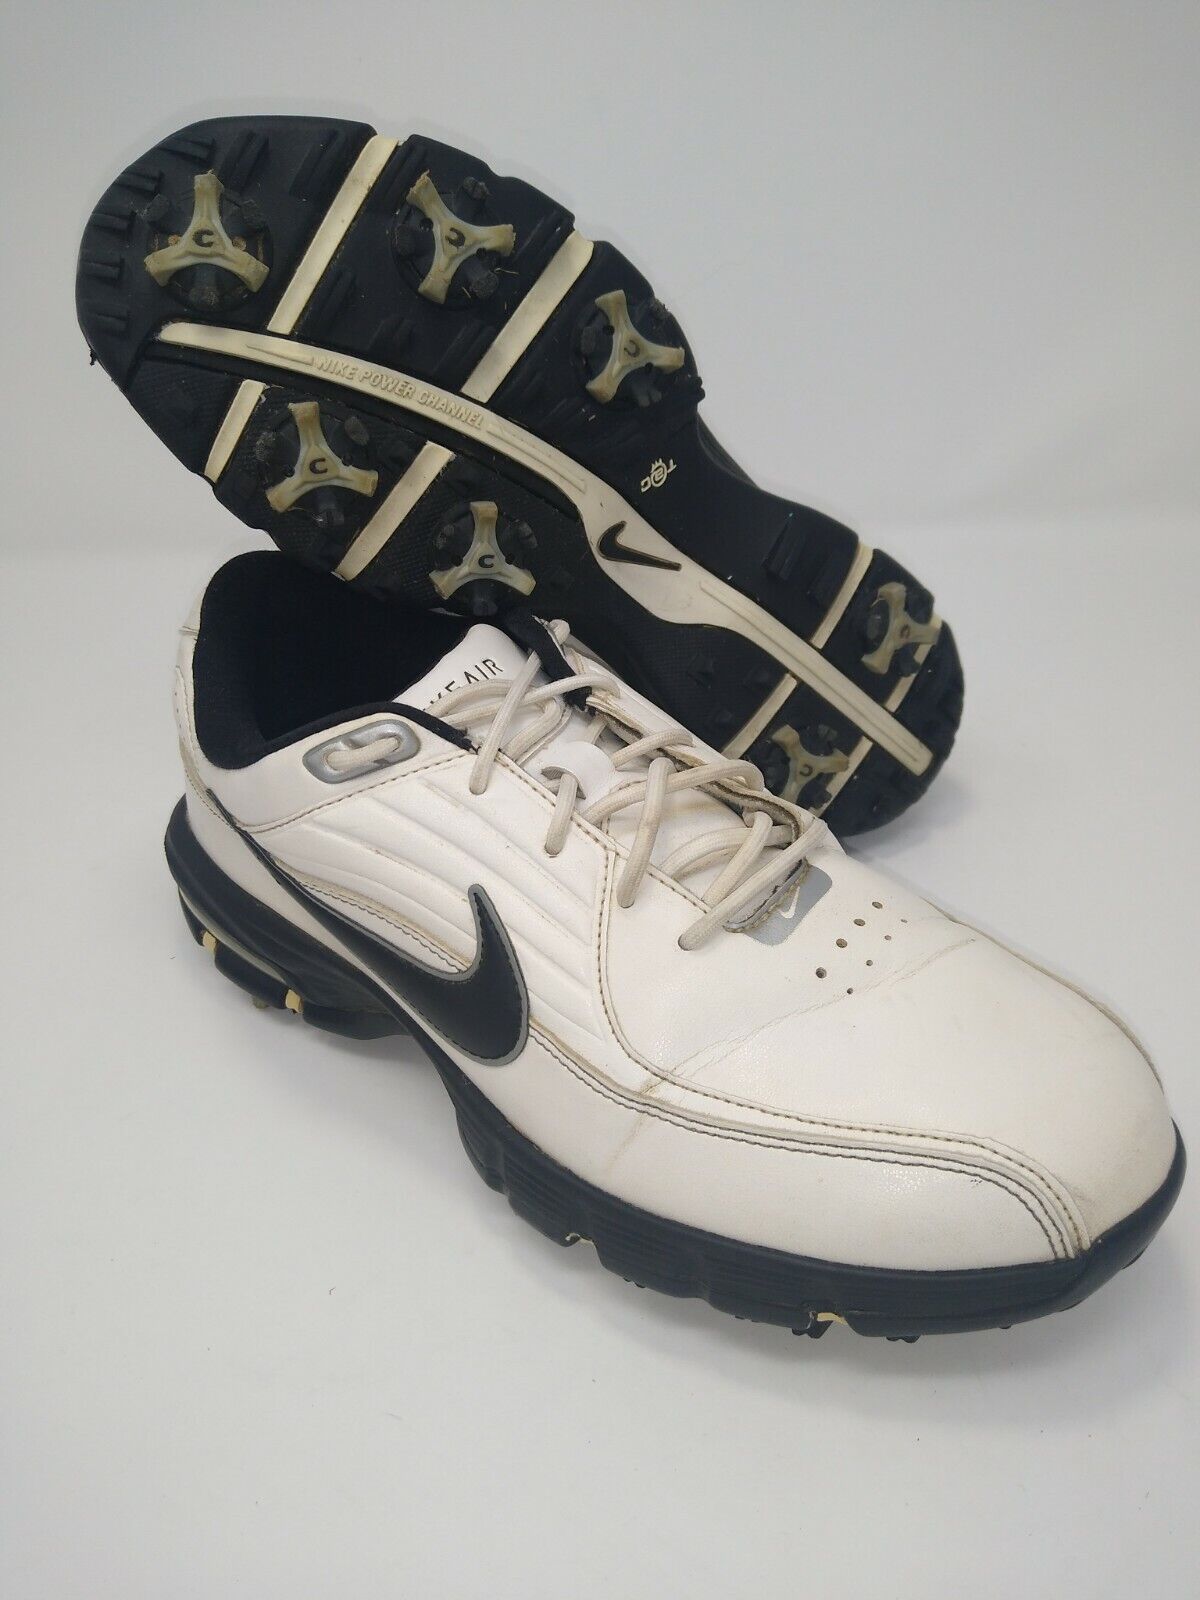 Nike Air Rival Mens Golf Cleat size 7 Whit Black Leather 484764-